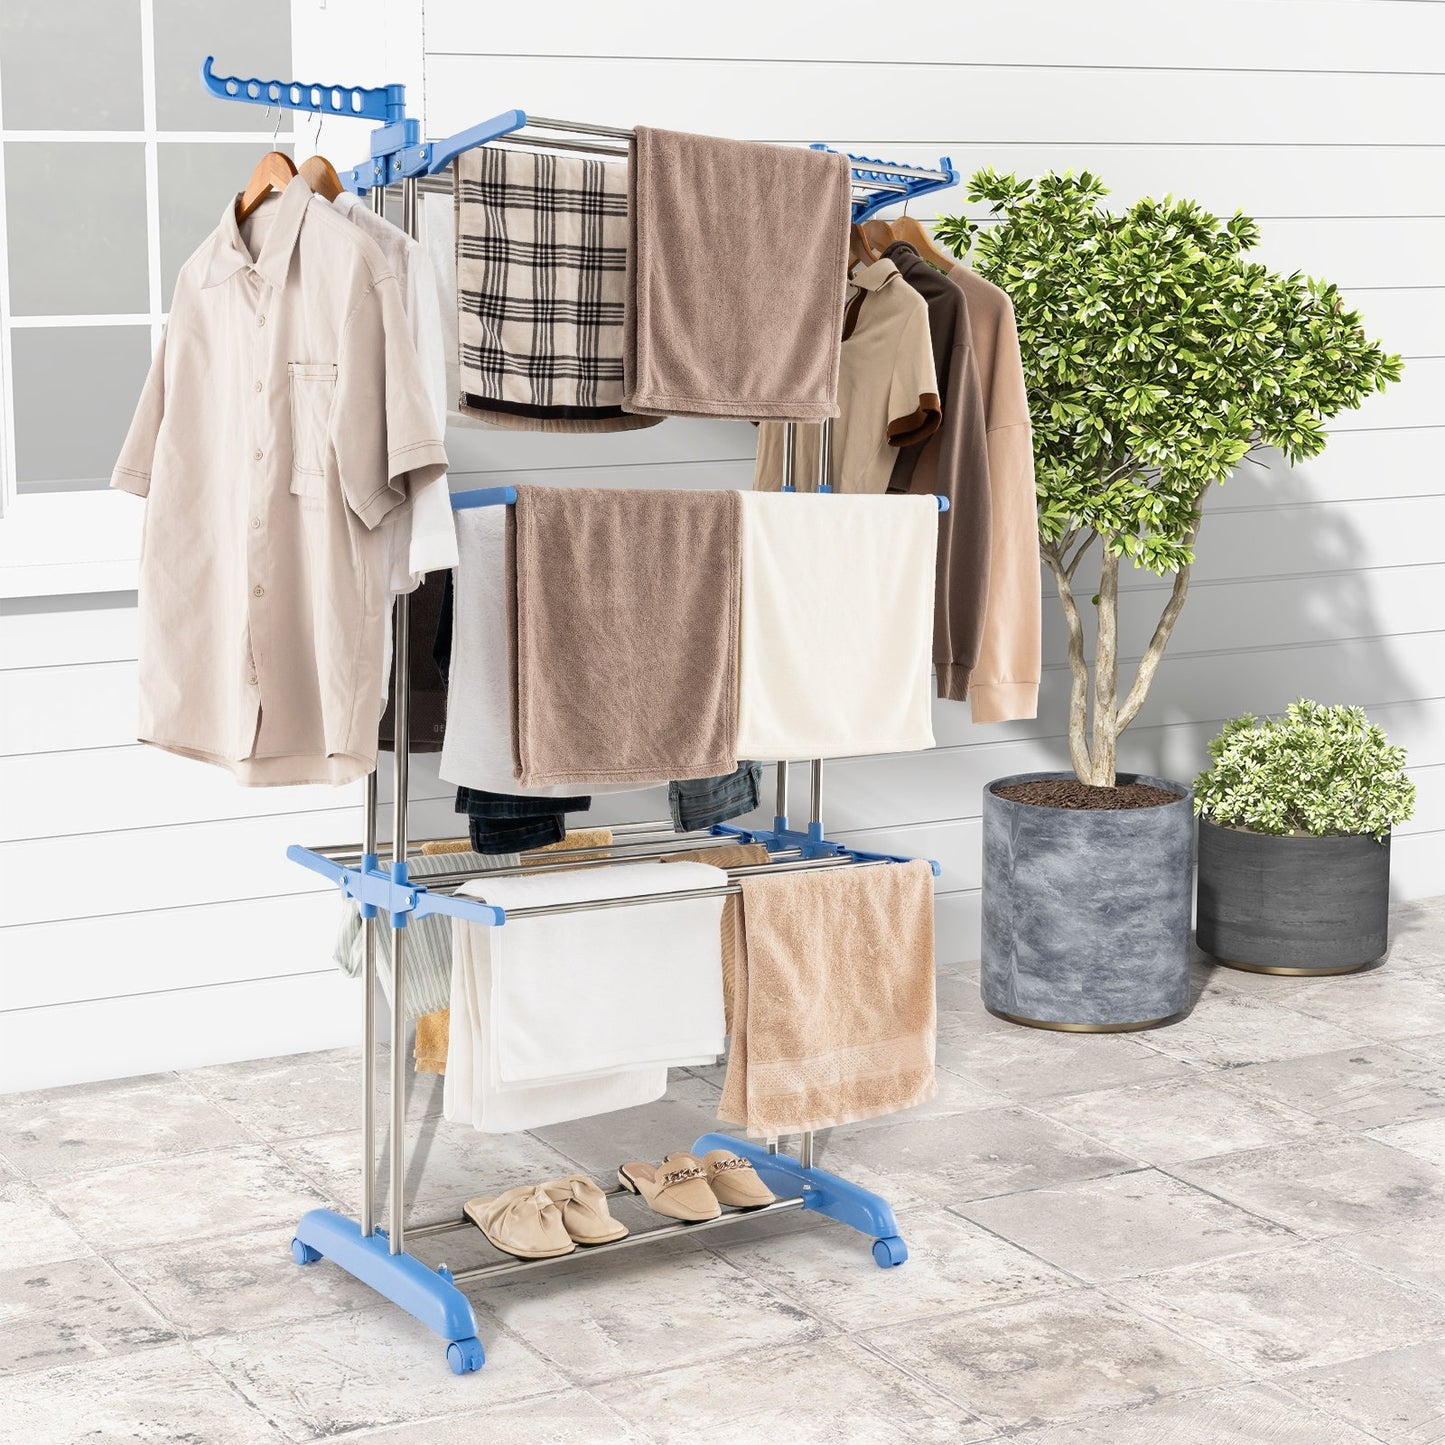 4-tier Folding Clothes Drying Rack with Rotatable Side Wings, Blue